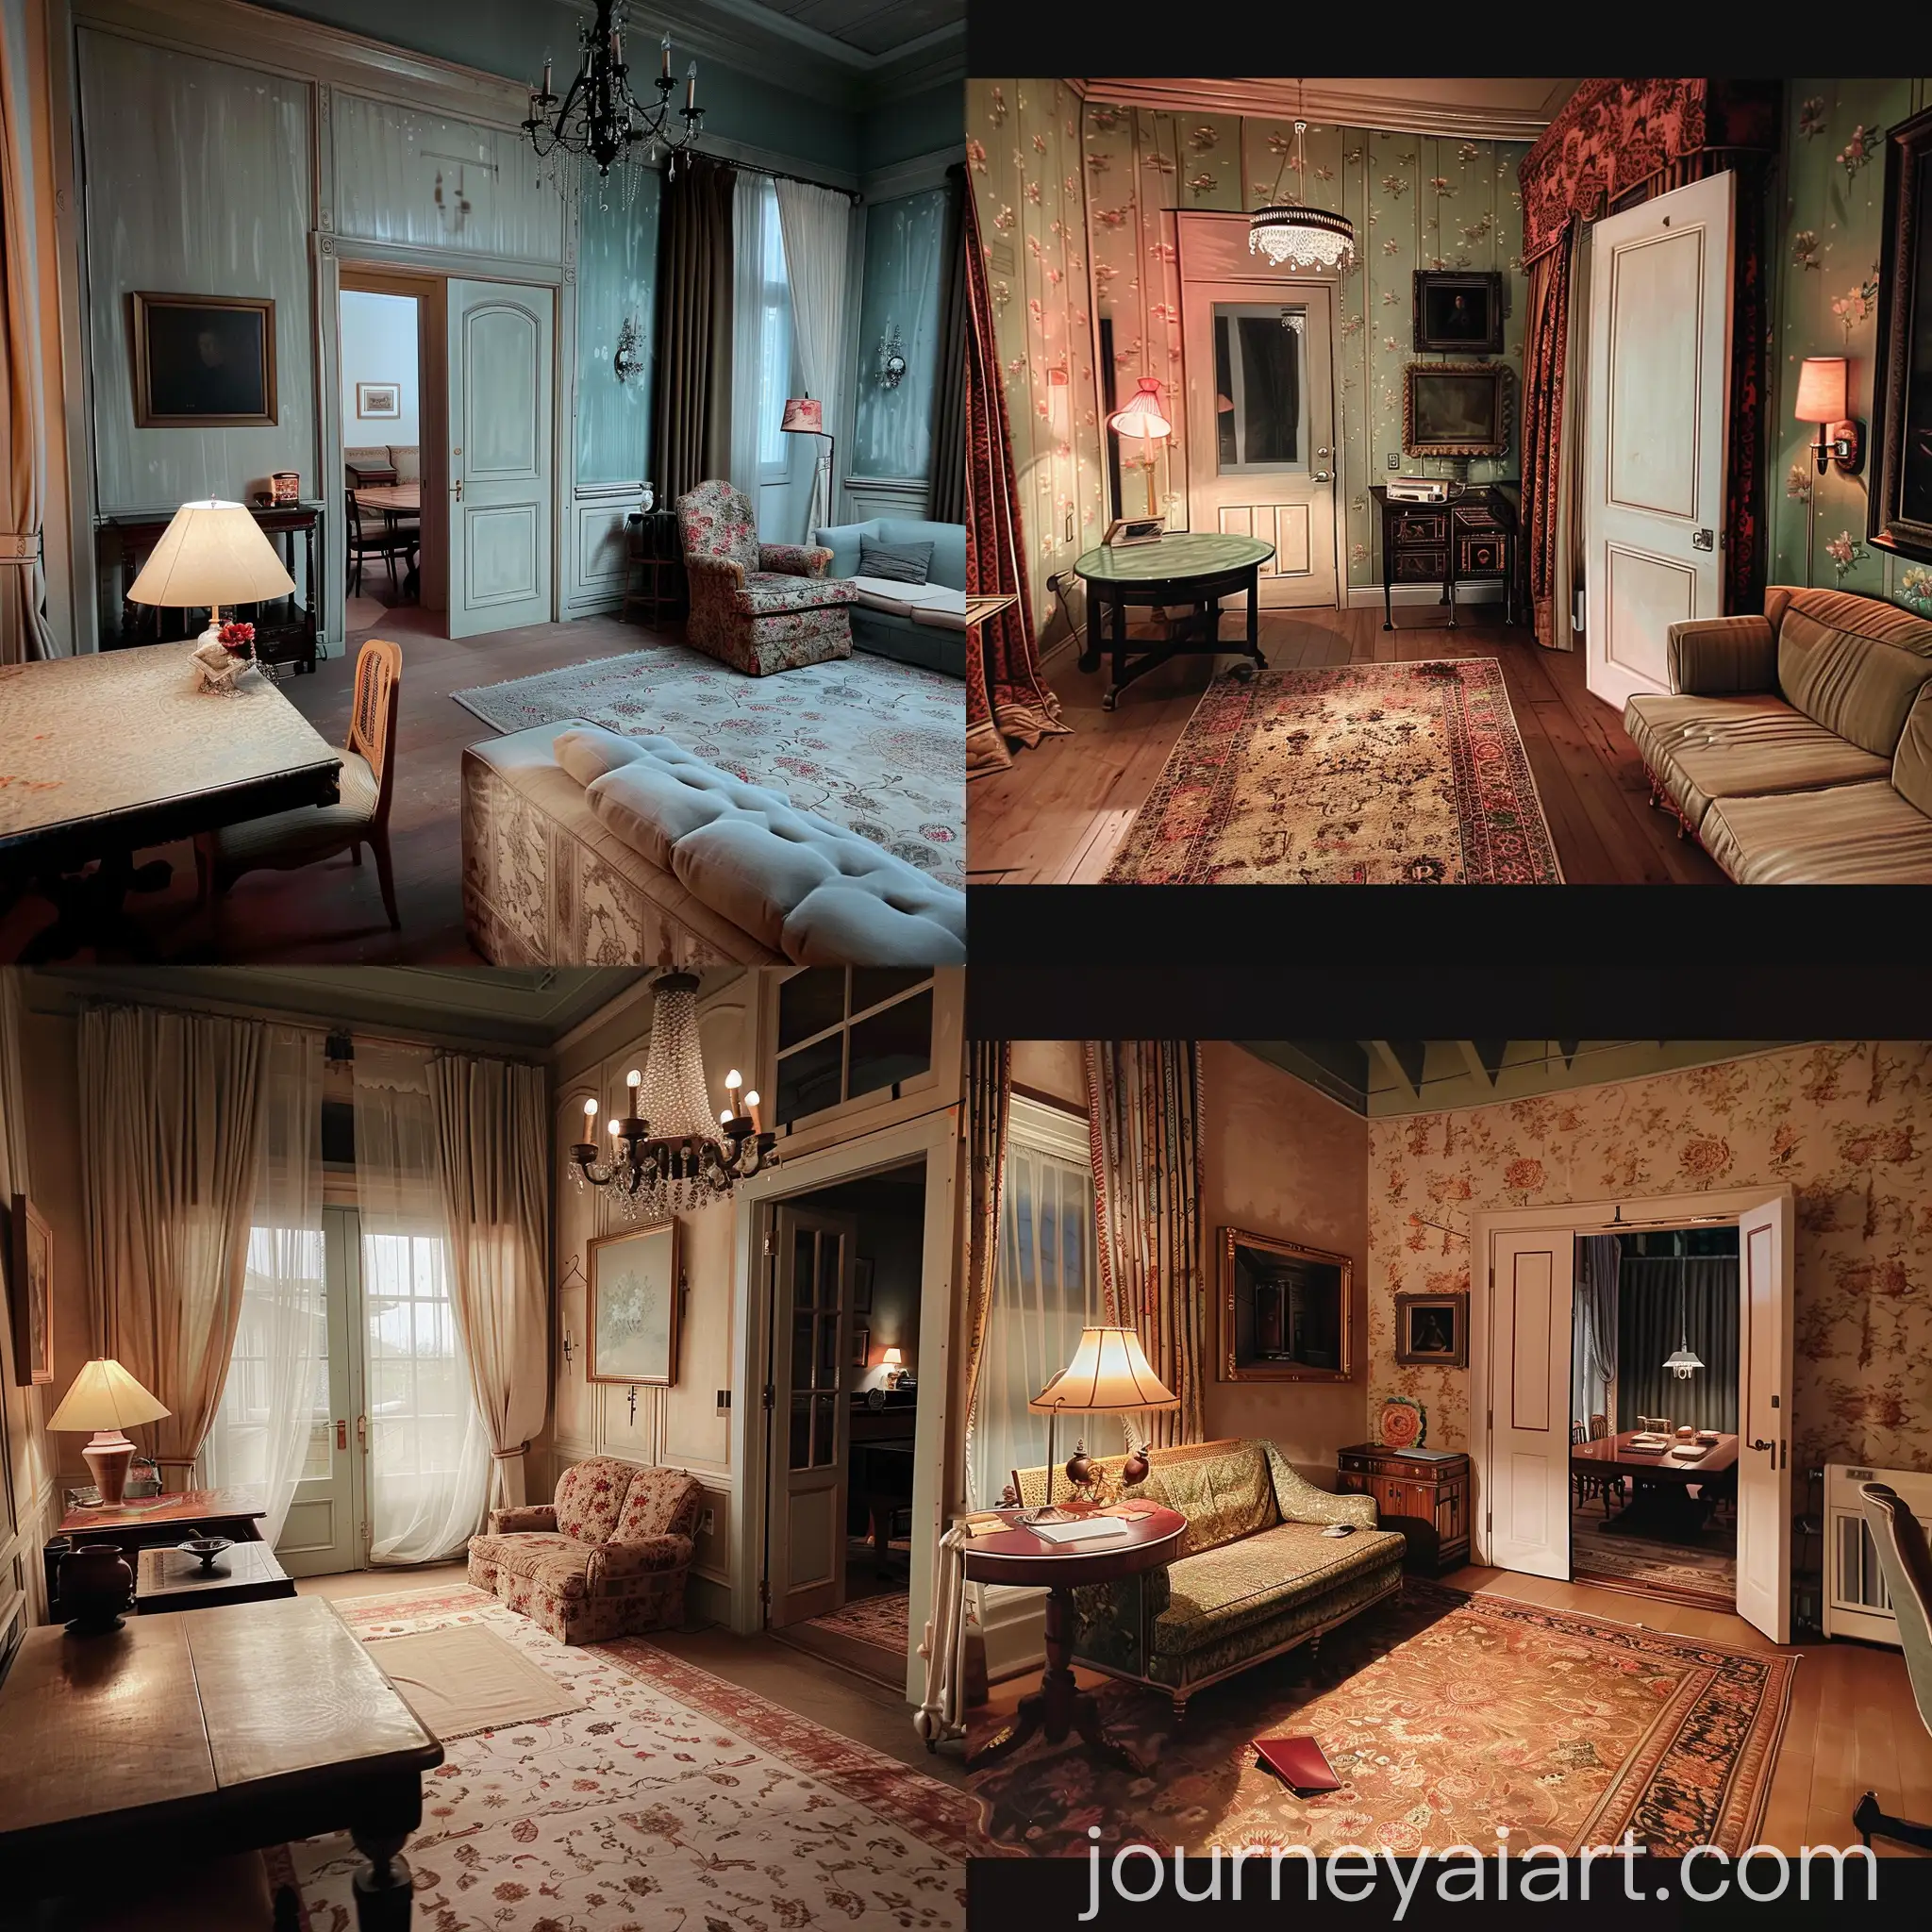 Interior-Room-with-Furniture-Lamp-Curtains-and-Closed-Door